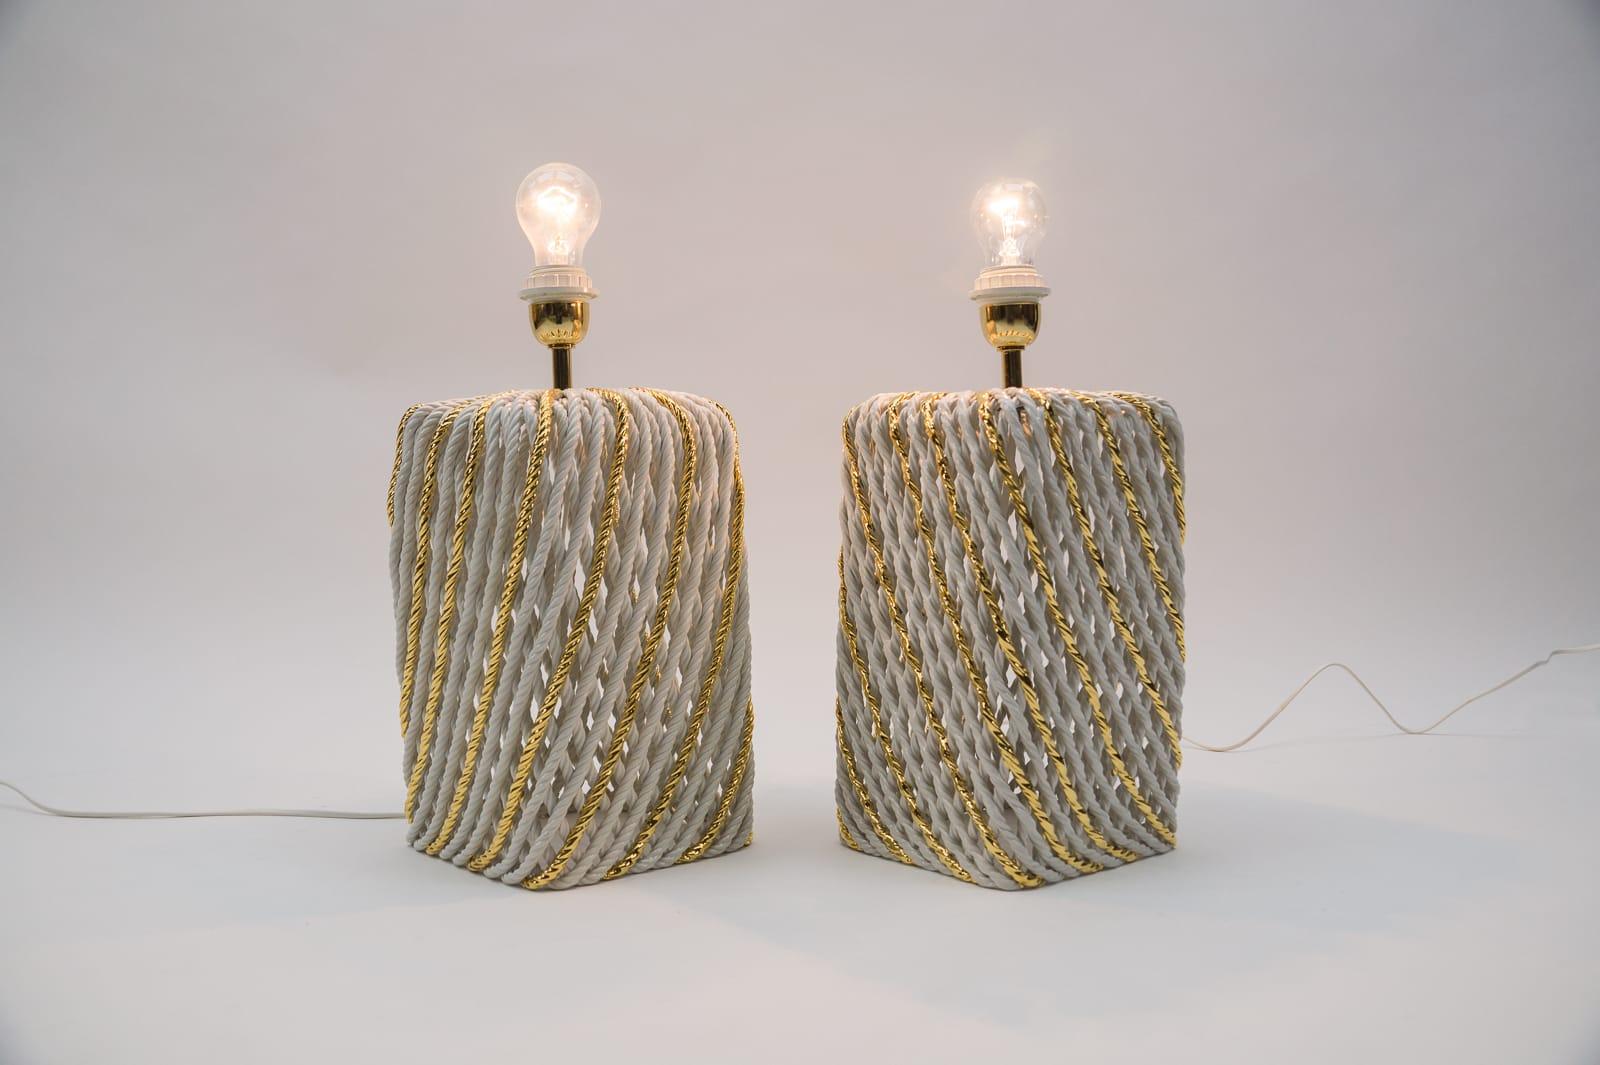 Pair of Extravagant Ceramic Braid Table Lamps, 1980s Italy For Sale 2